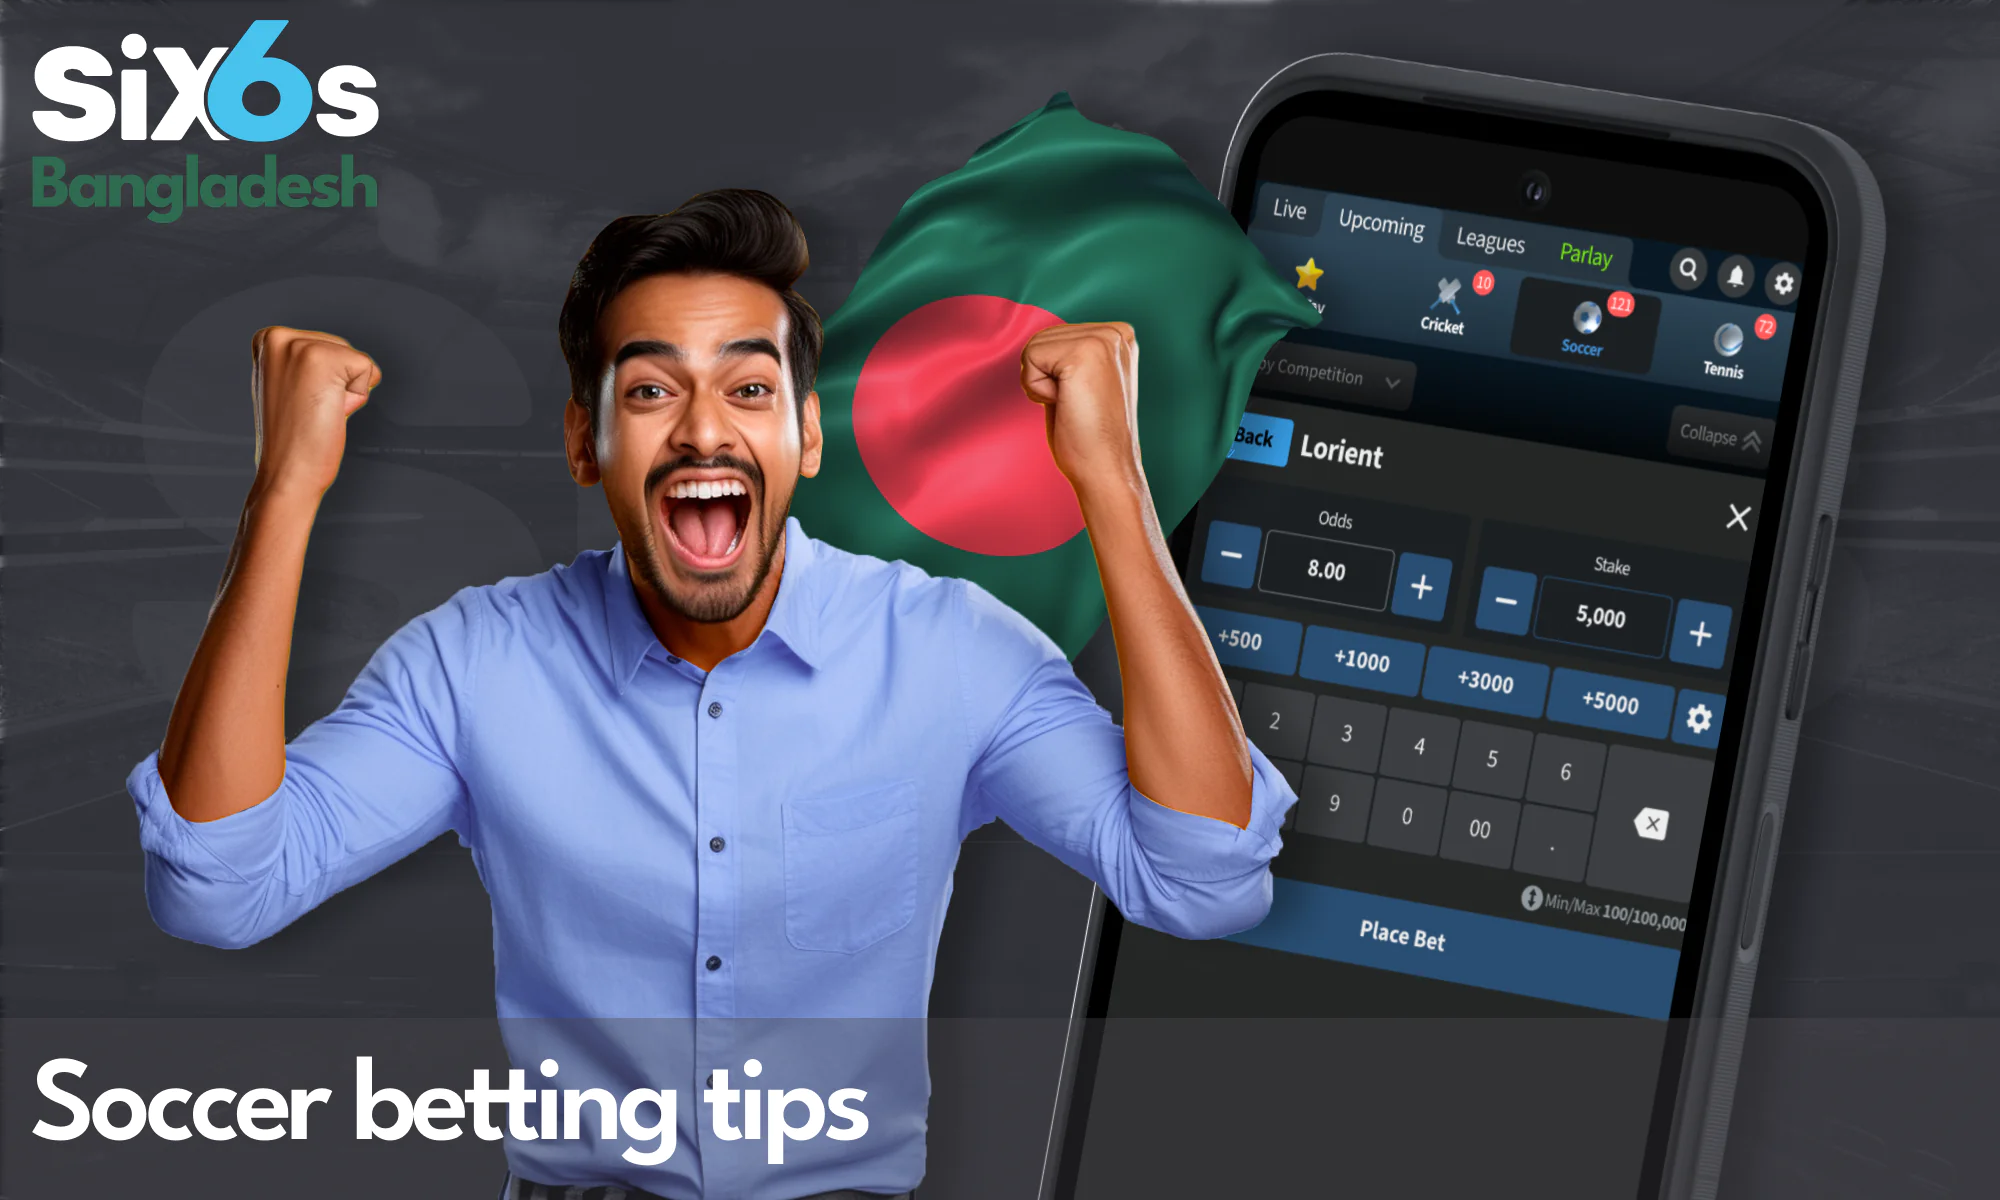 Betting tipps for players from Bangladesh - Six6s